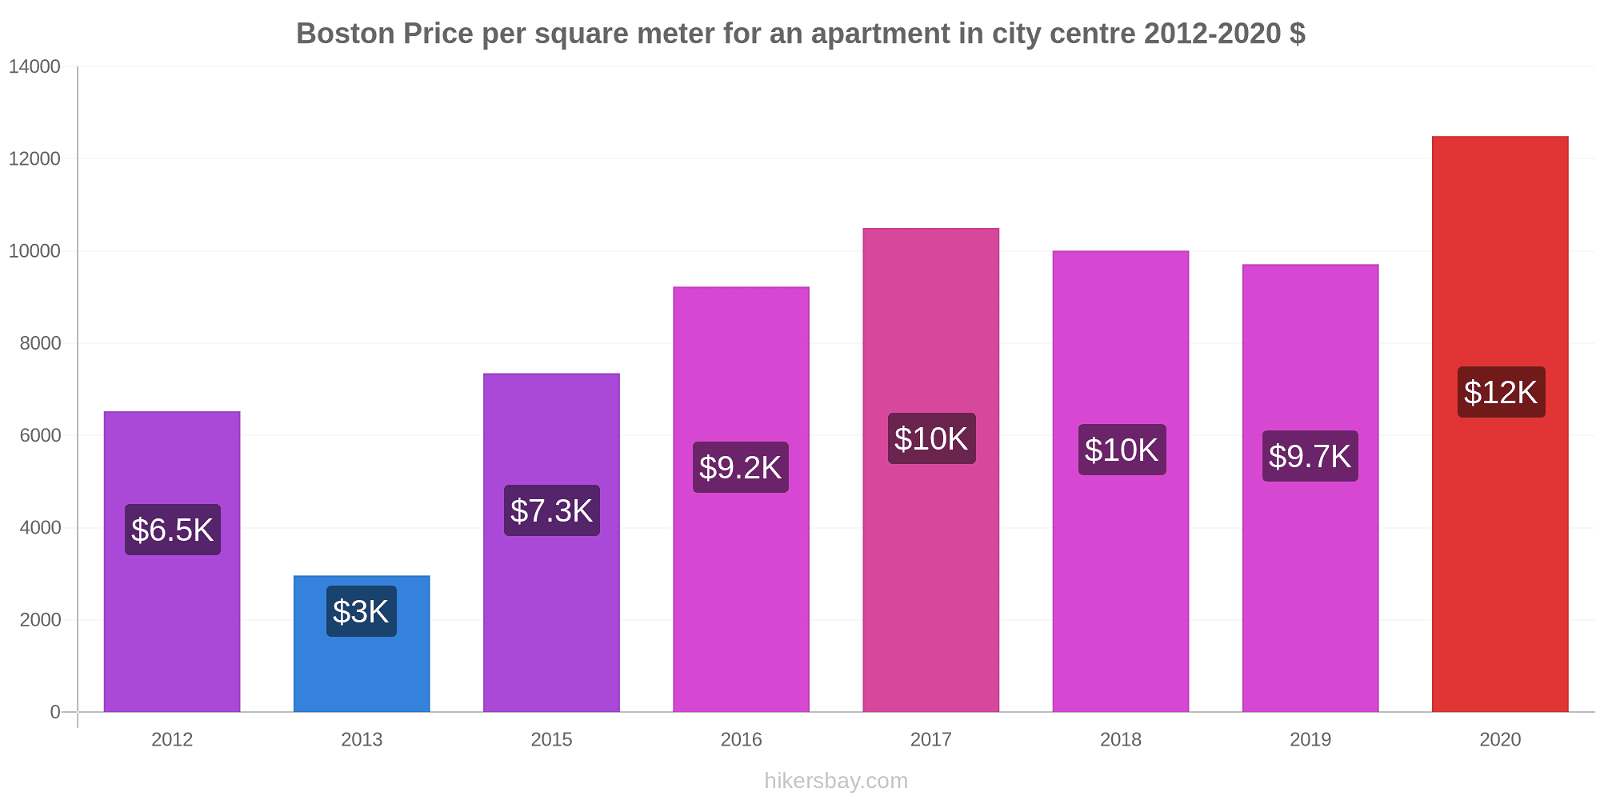 Boston price changes Price per square meter for an apartment in city centre hikersbay.com